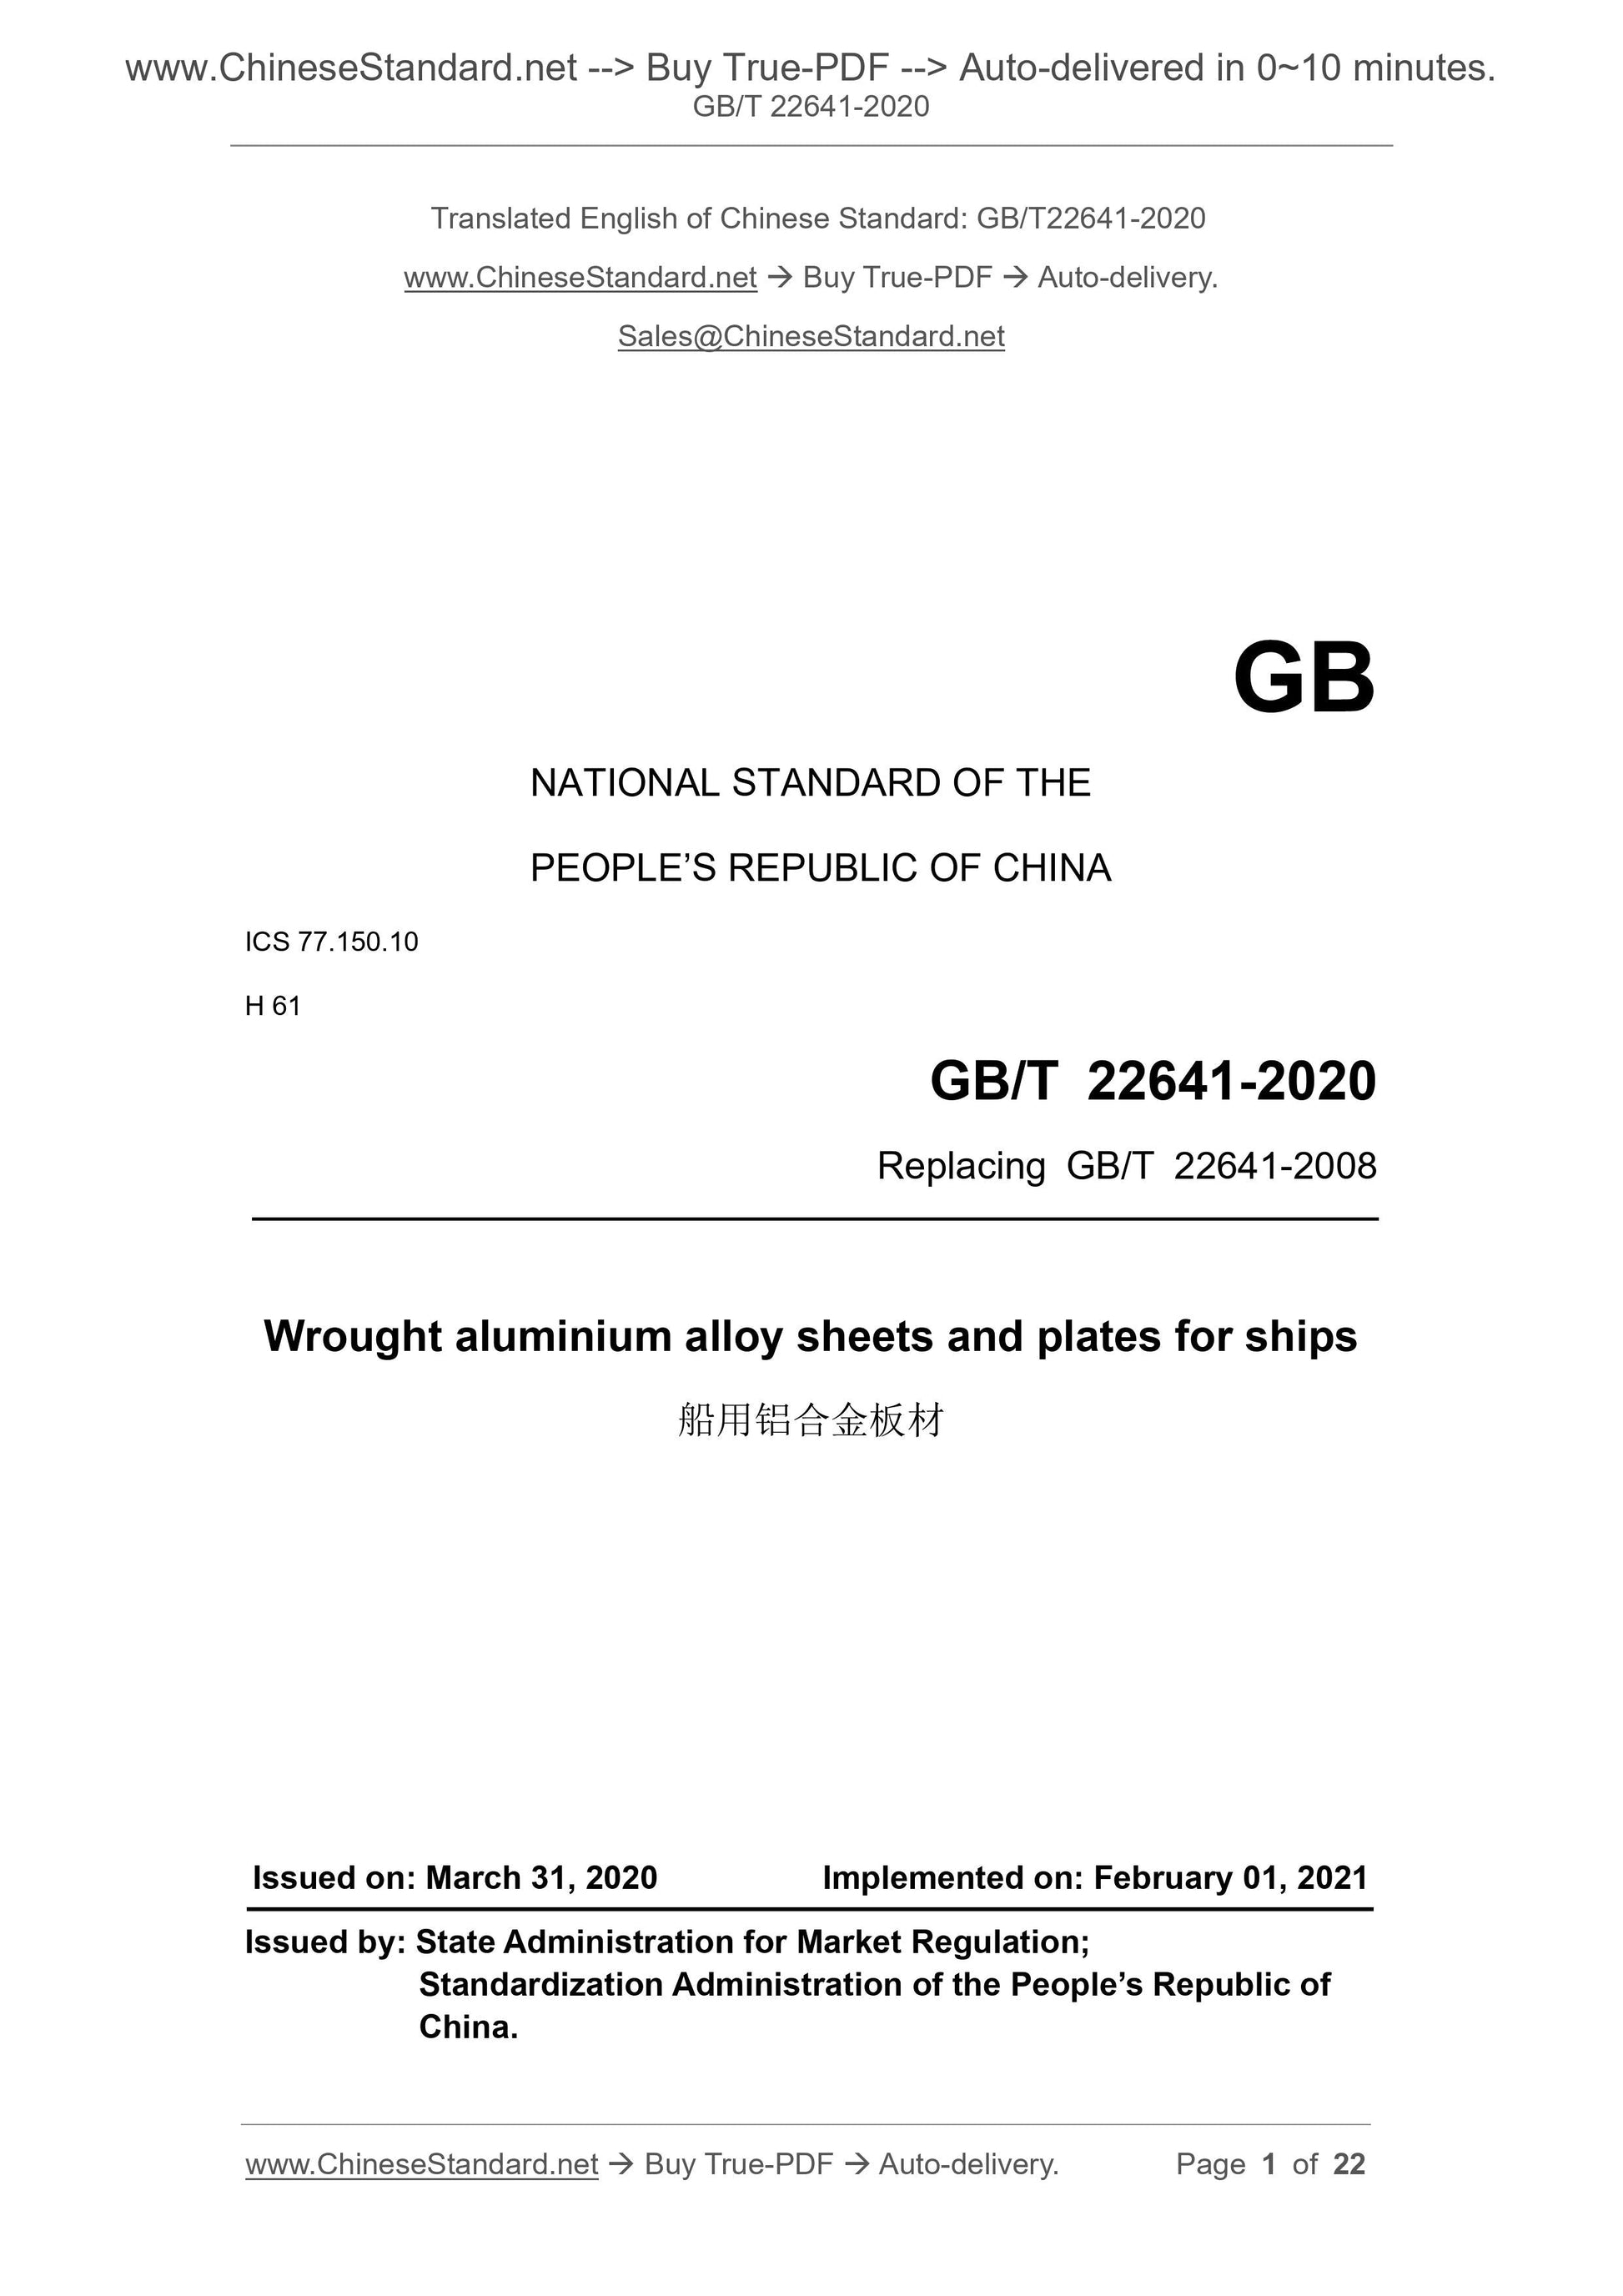 GB/T 22641-2020 Page 1